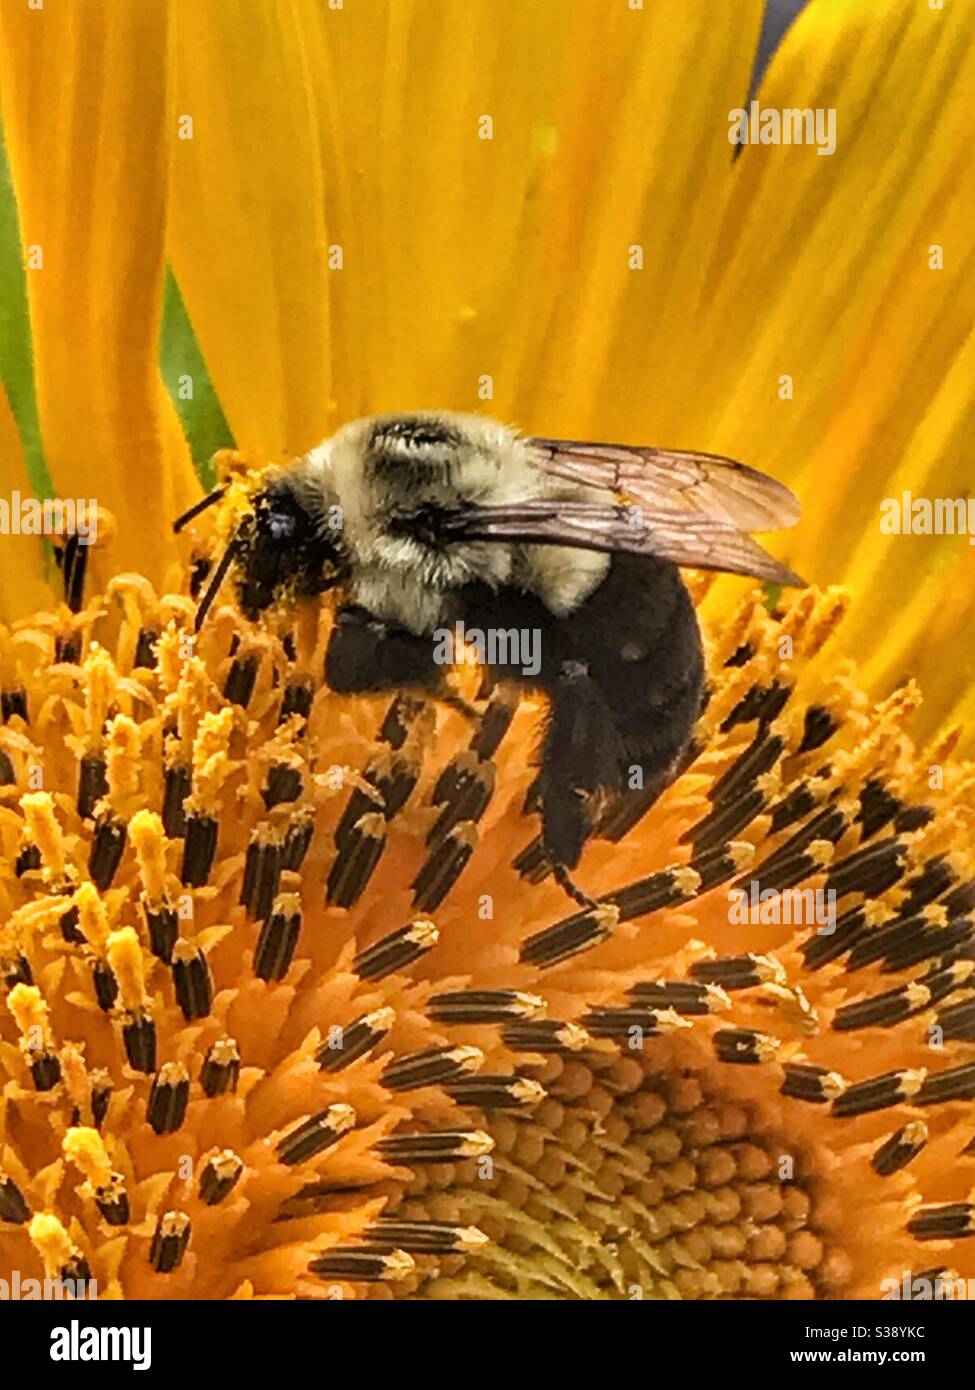 Bumblebee collecting pollen on a sunflower Stock Photo